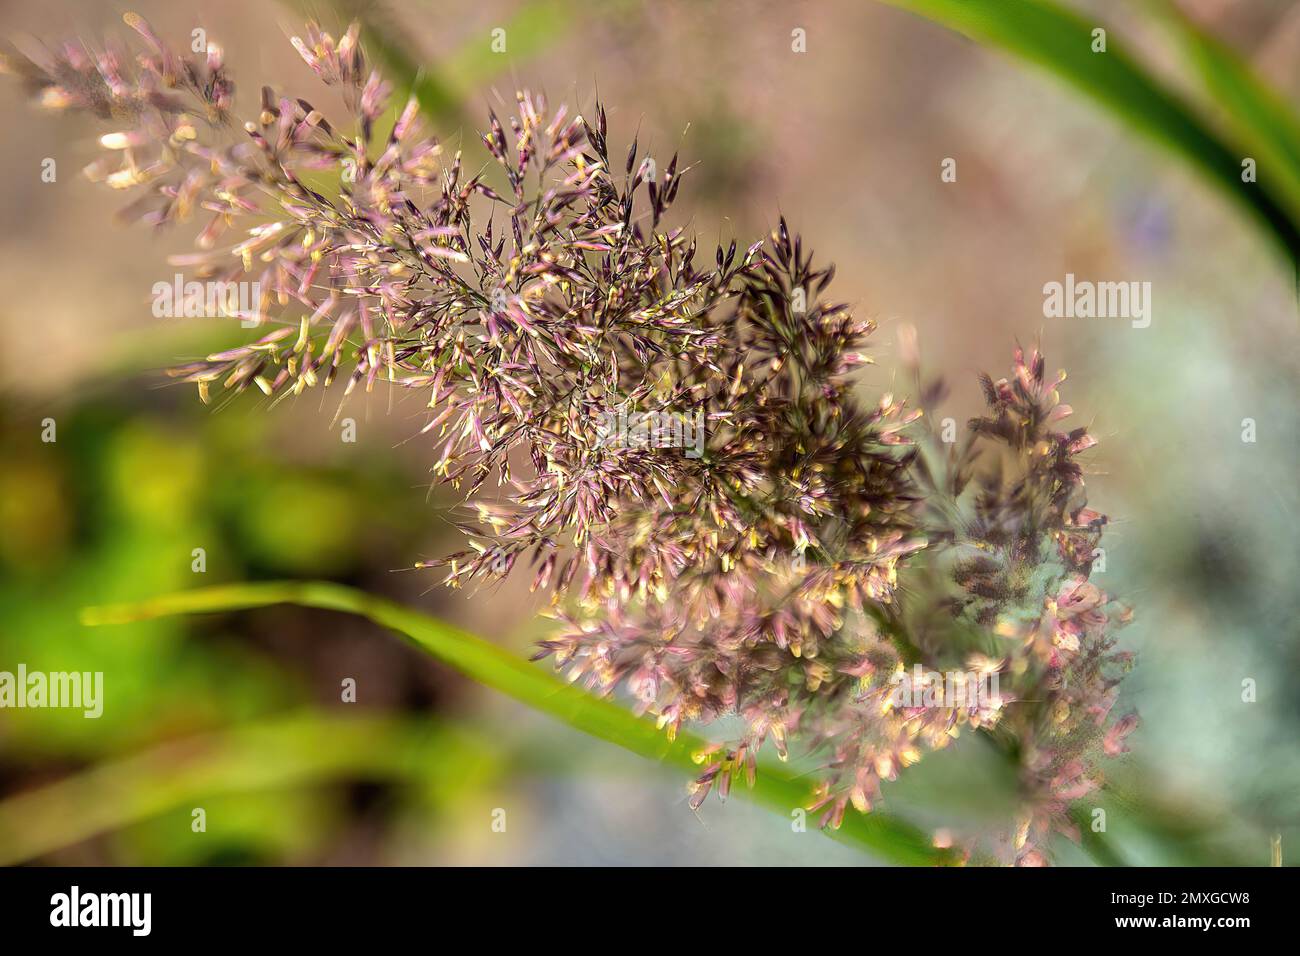 A closeup of a whisk of a molasses grass plant against a blurred background. Stock Photo